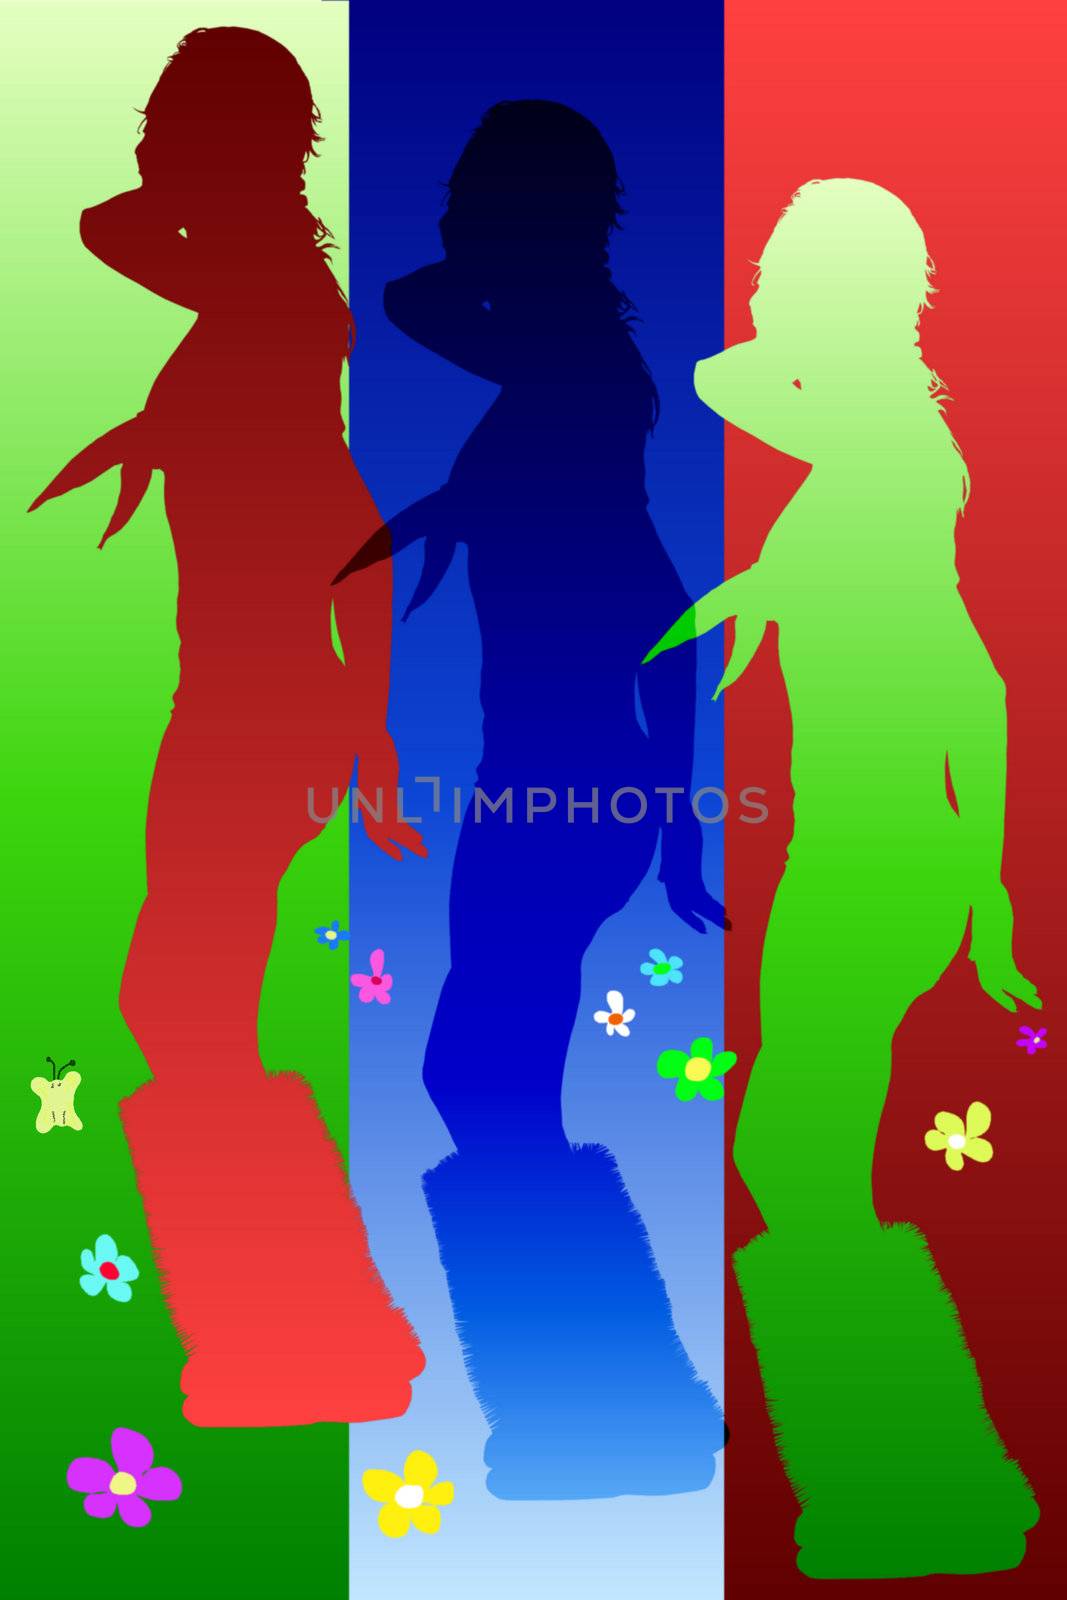 Drawn silhouette of girl dancing on a varicoloured background with flowers
